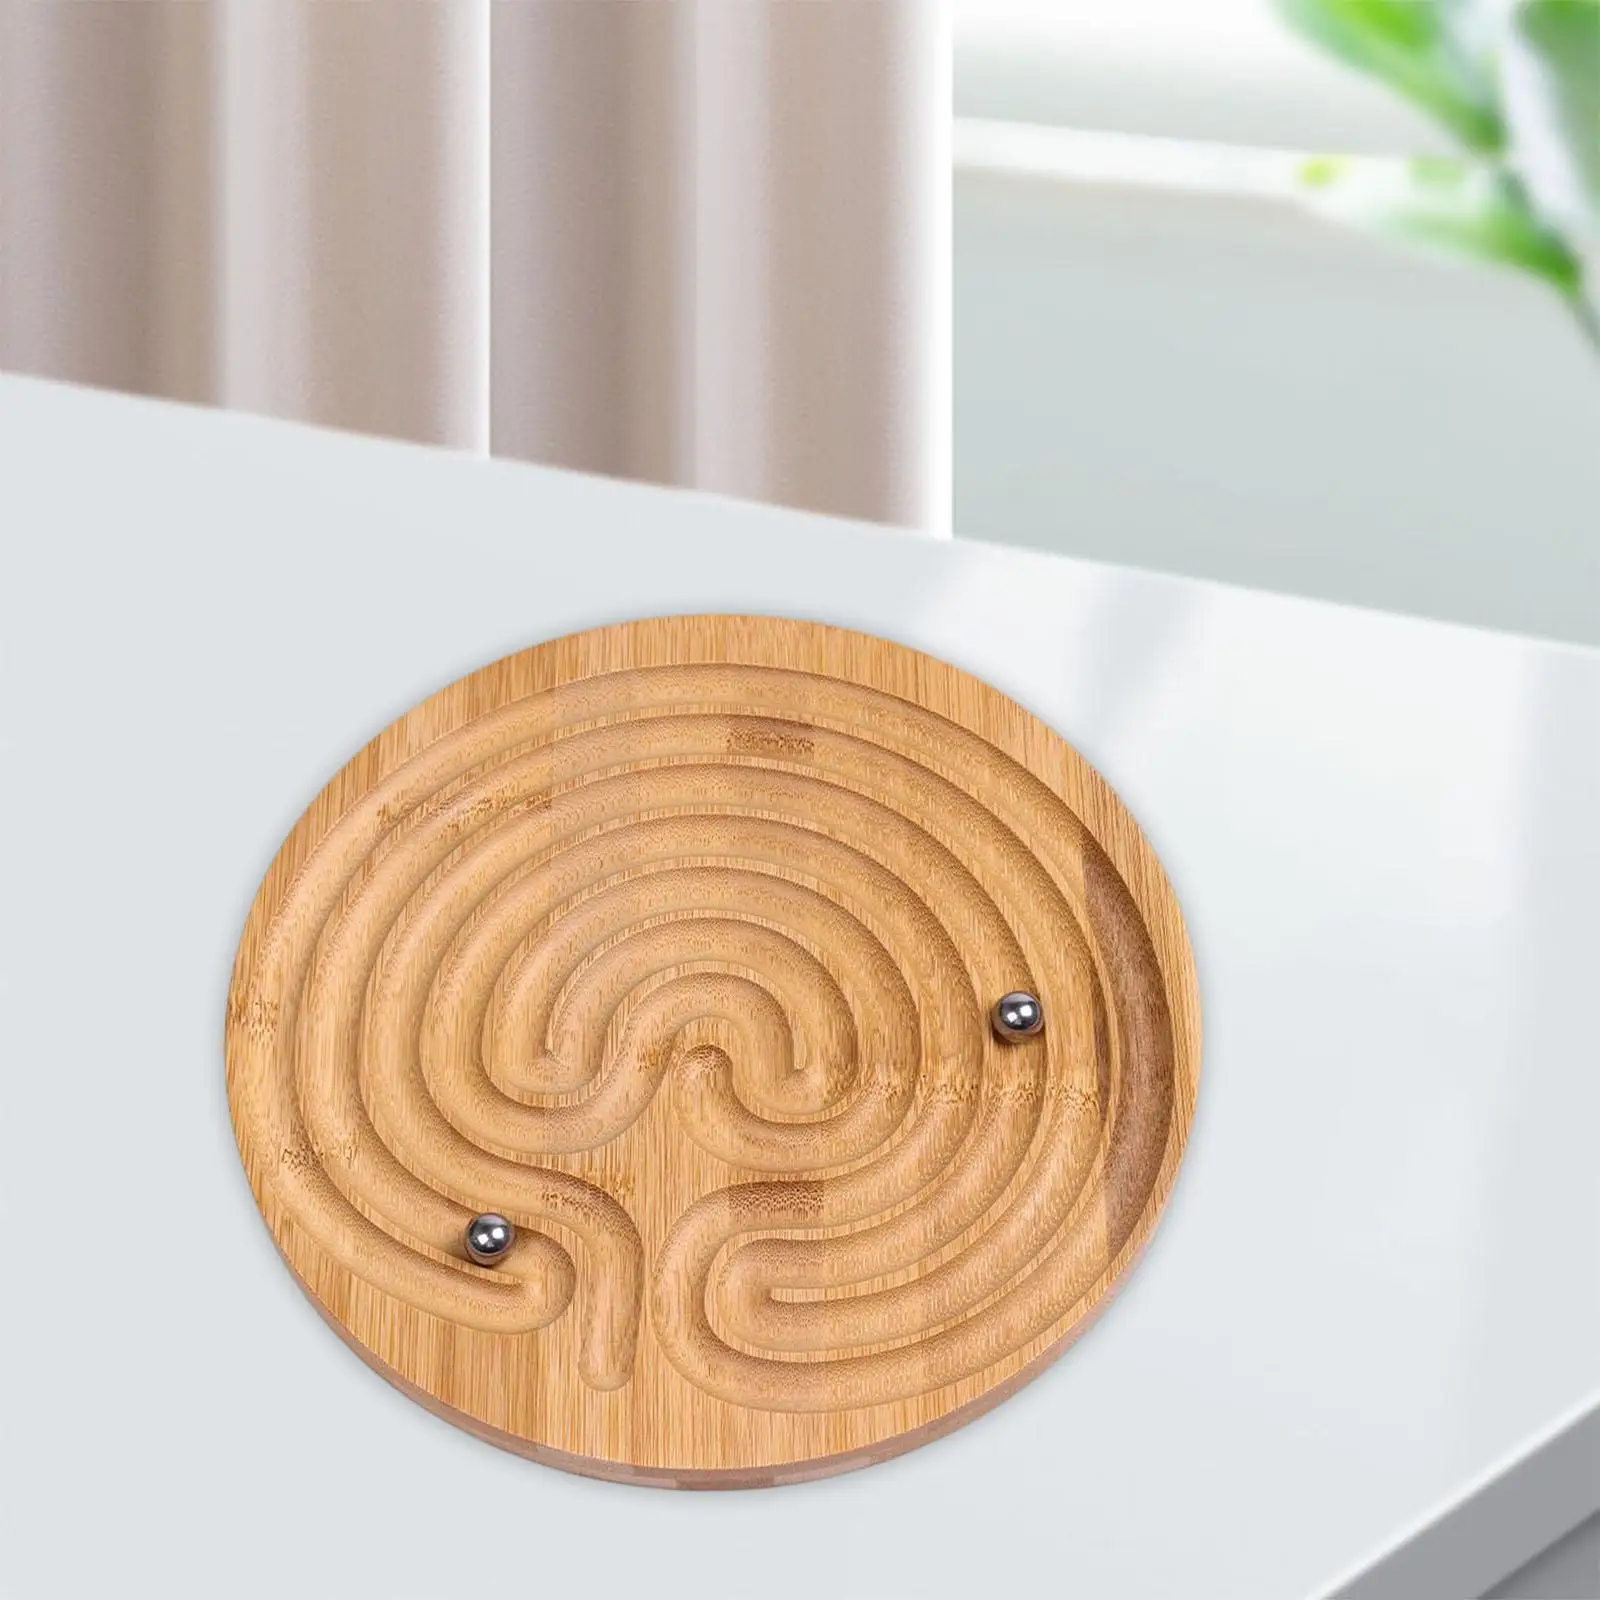 Wooden Labyrinth Toy Brain Teaser Game Educational Learning Toy for Toddler